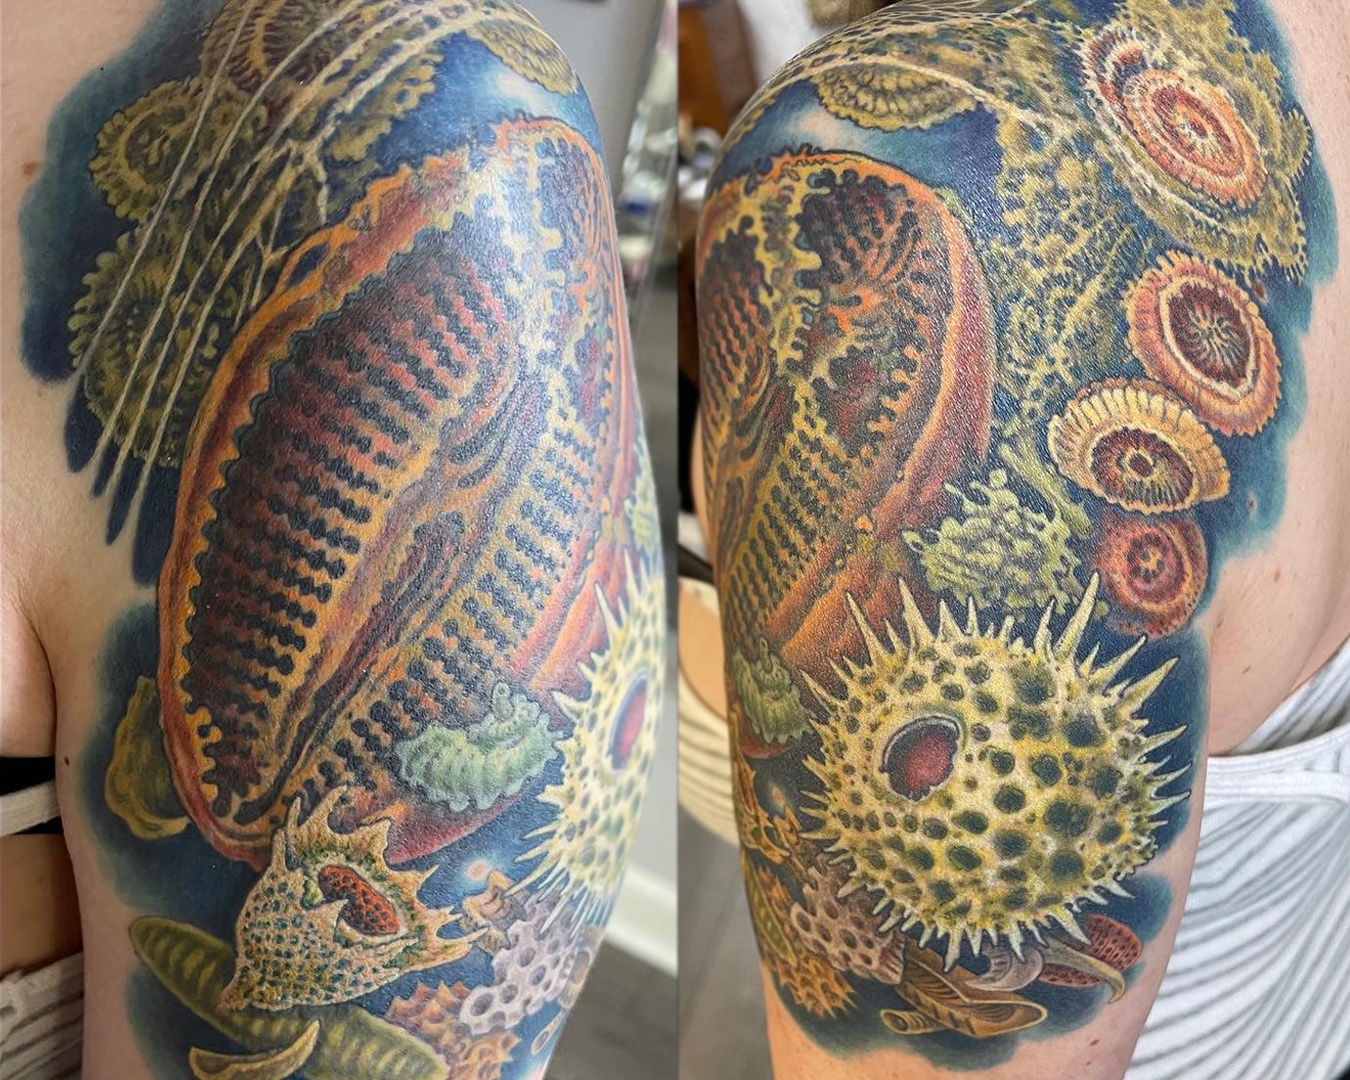 sea creatures or viruses, I can't really tell what's going on in this tattoo